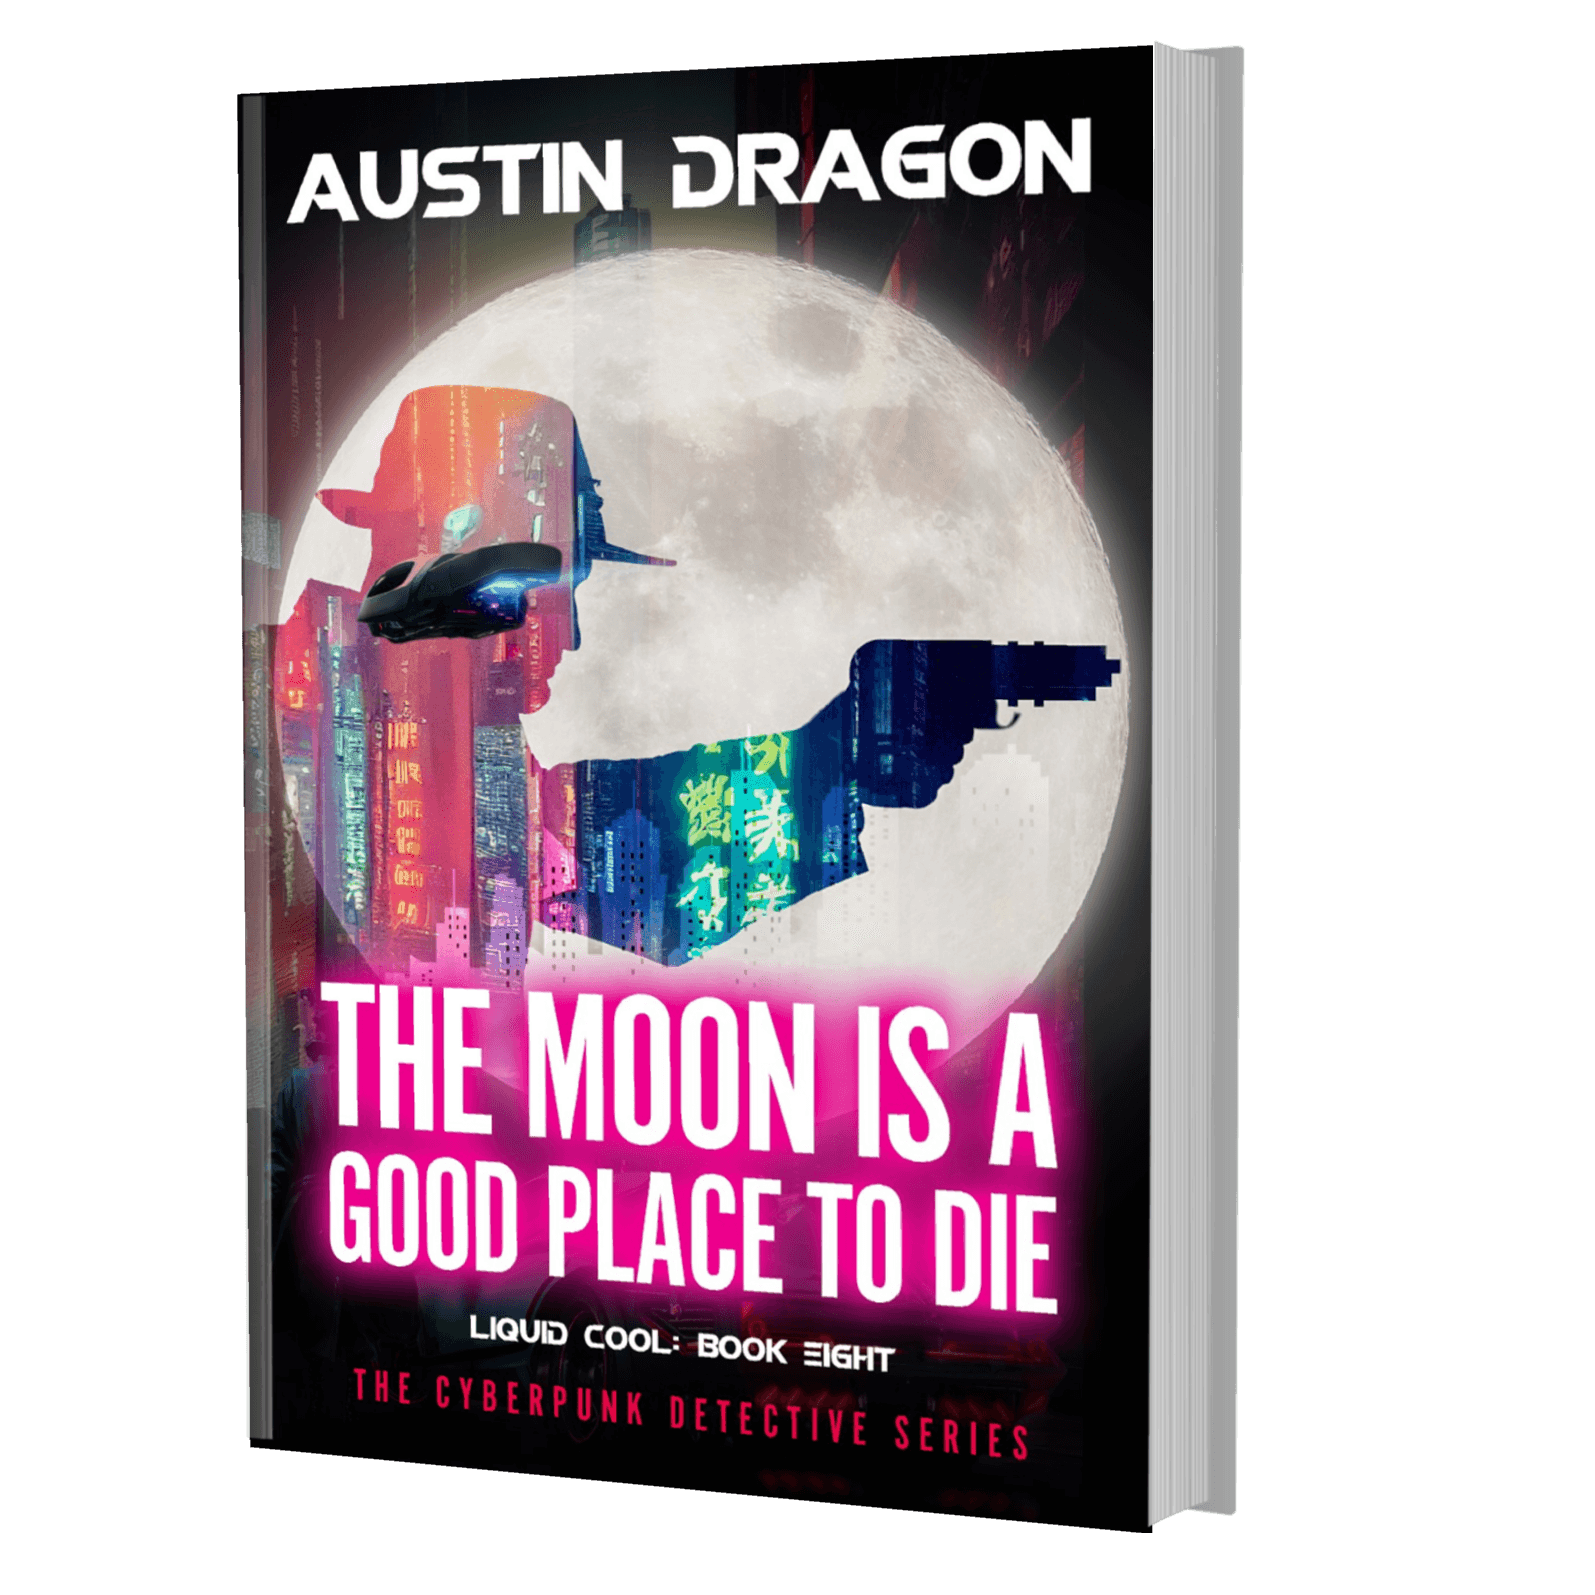 The Moon Is a Good Place to Die (Liquid Cool, Book 8) Paperback